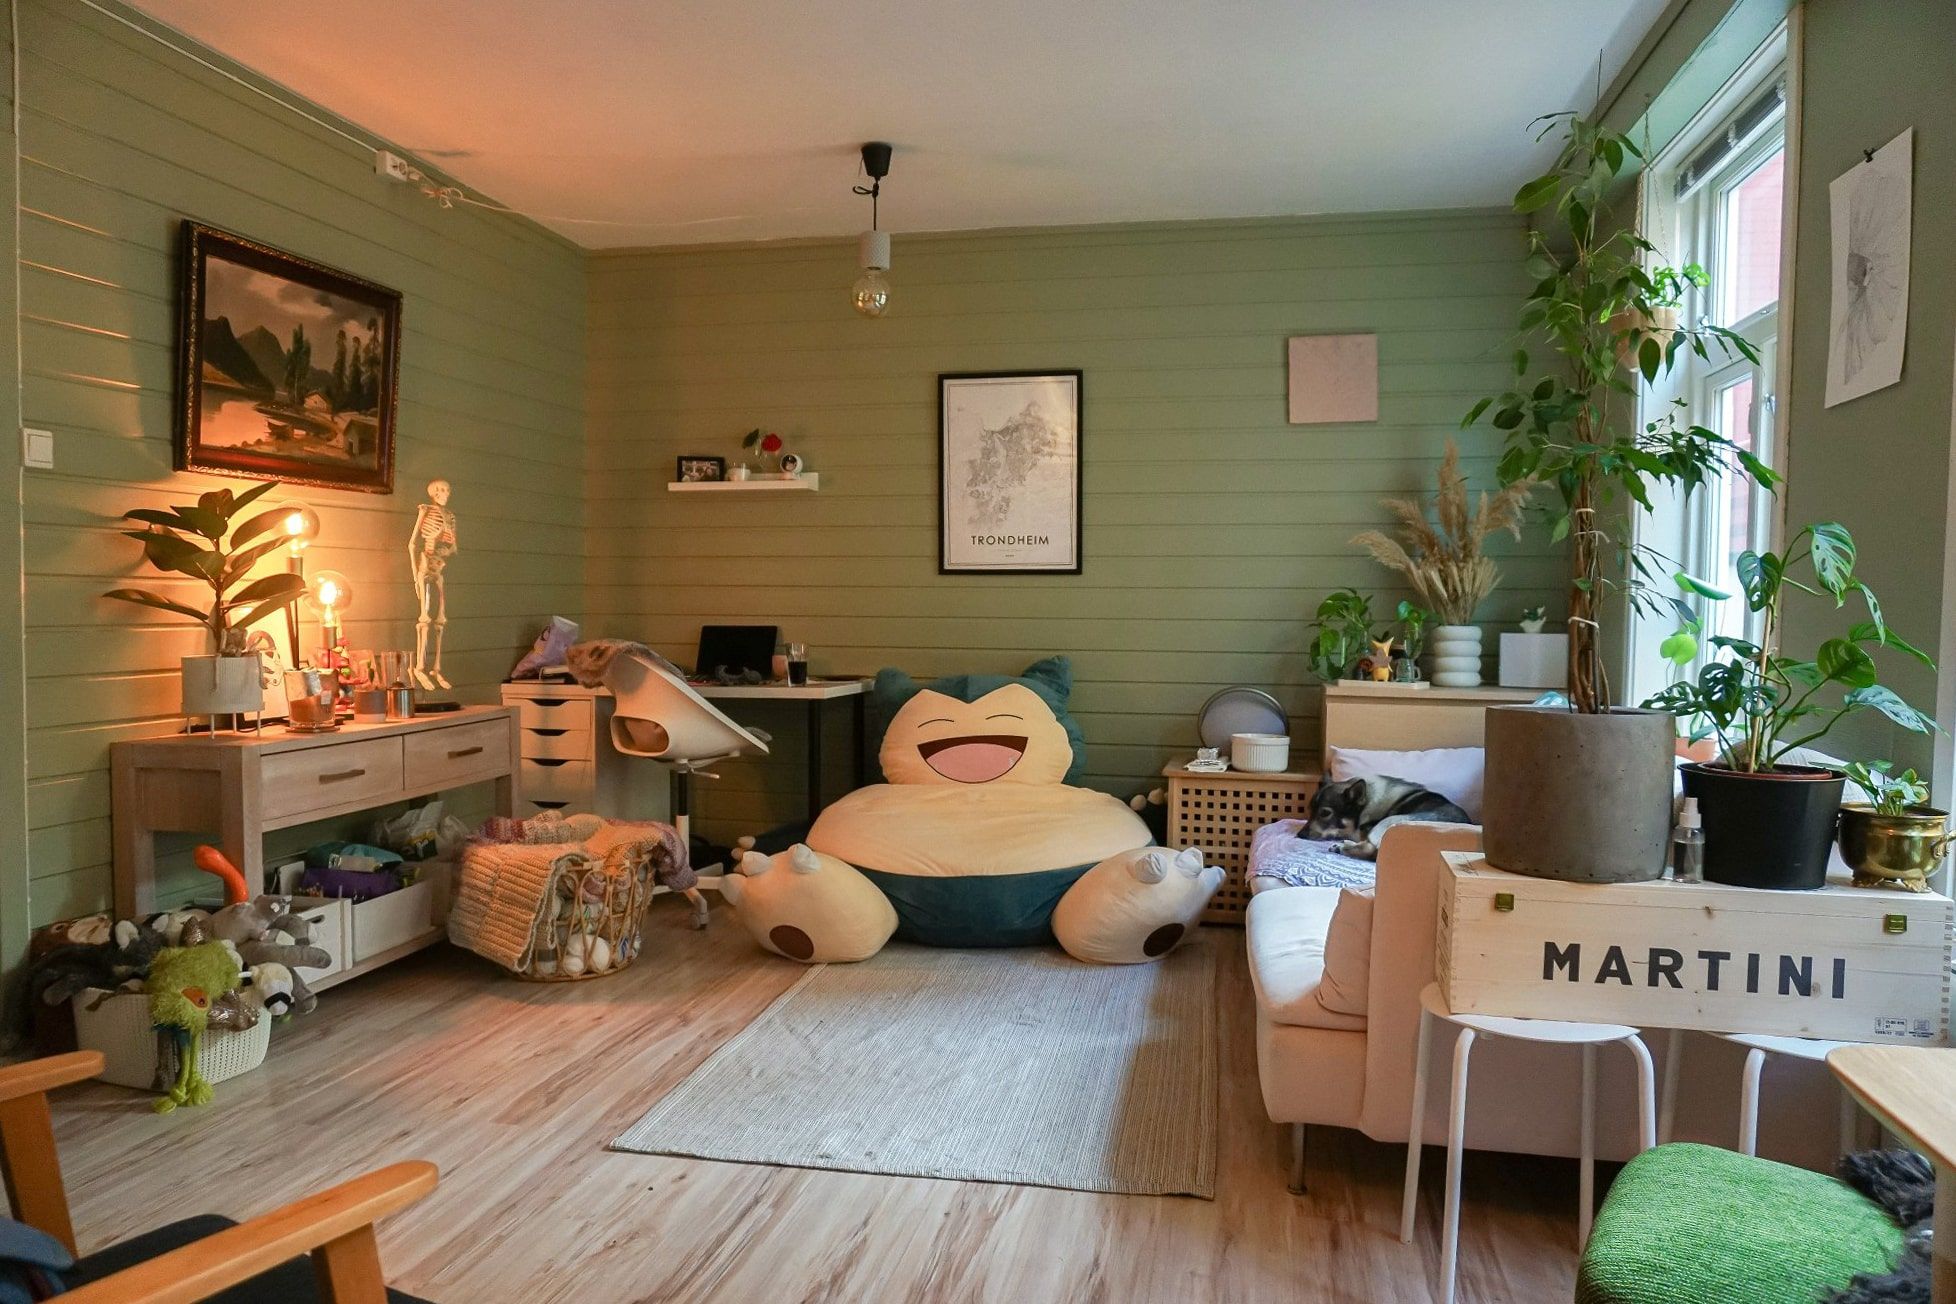 A calm and inviting living room with a giant Snorlax bean bag and lots of greenery